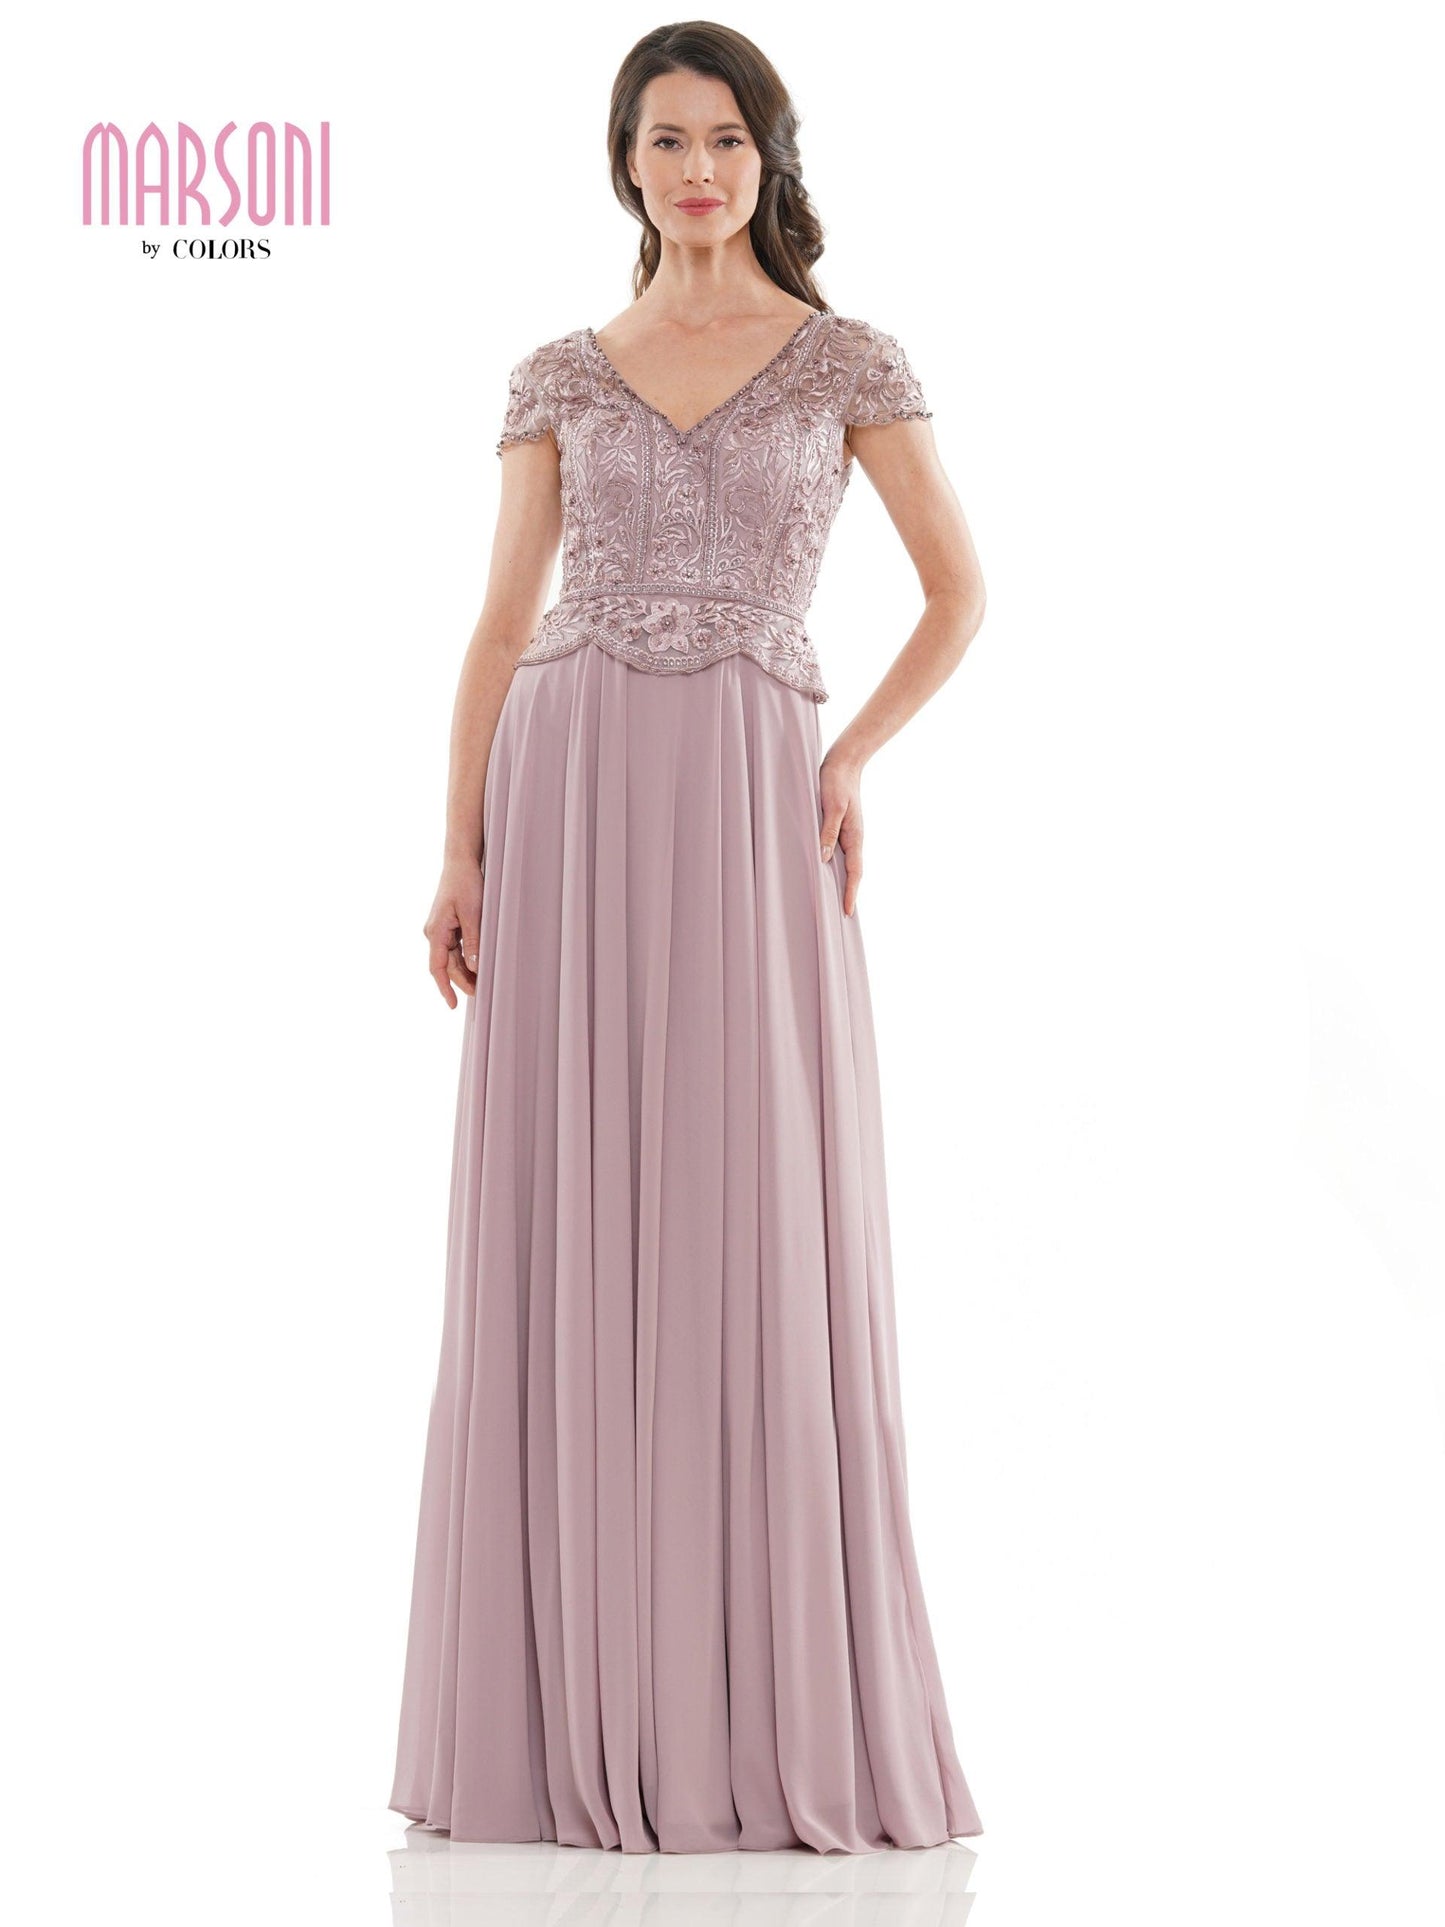 Marsoni Long Formal Mother of the Bride Dress 243 - The Dress Outlet